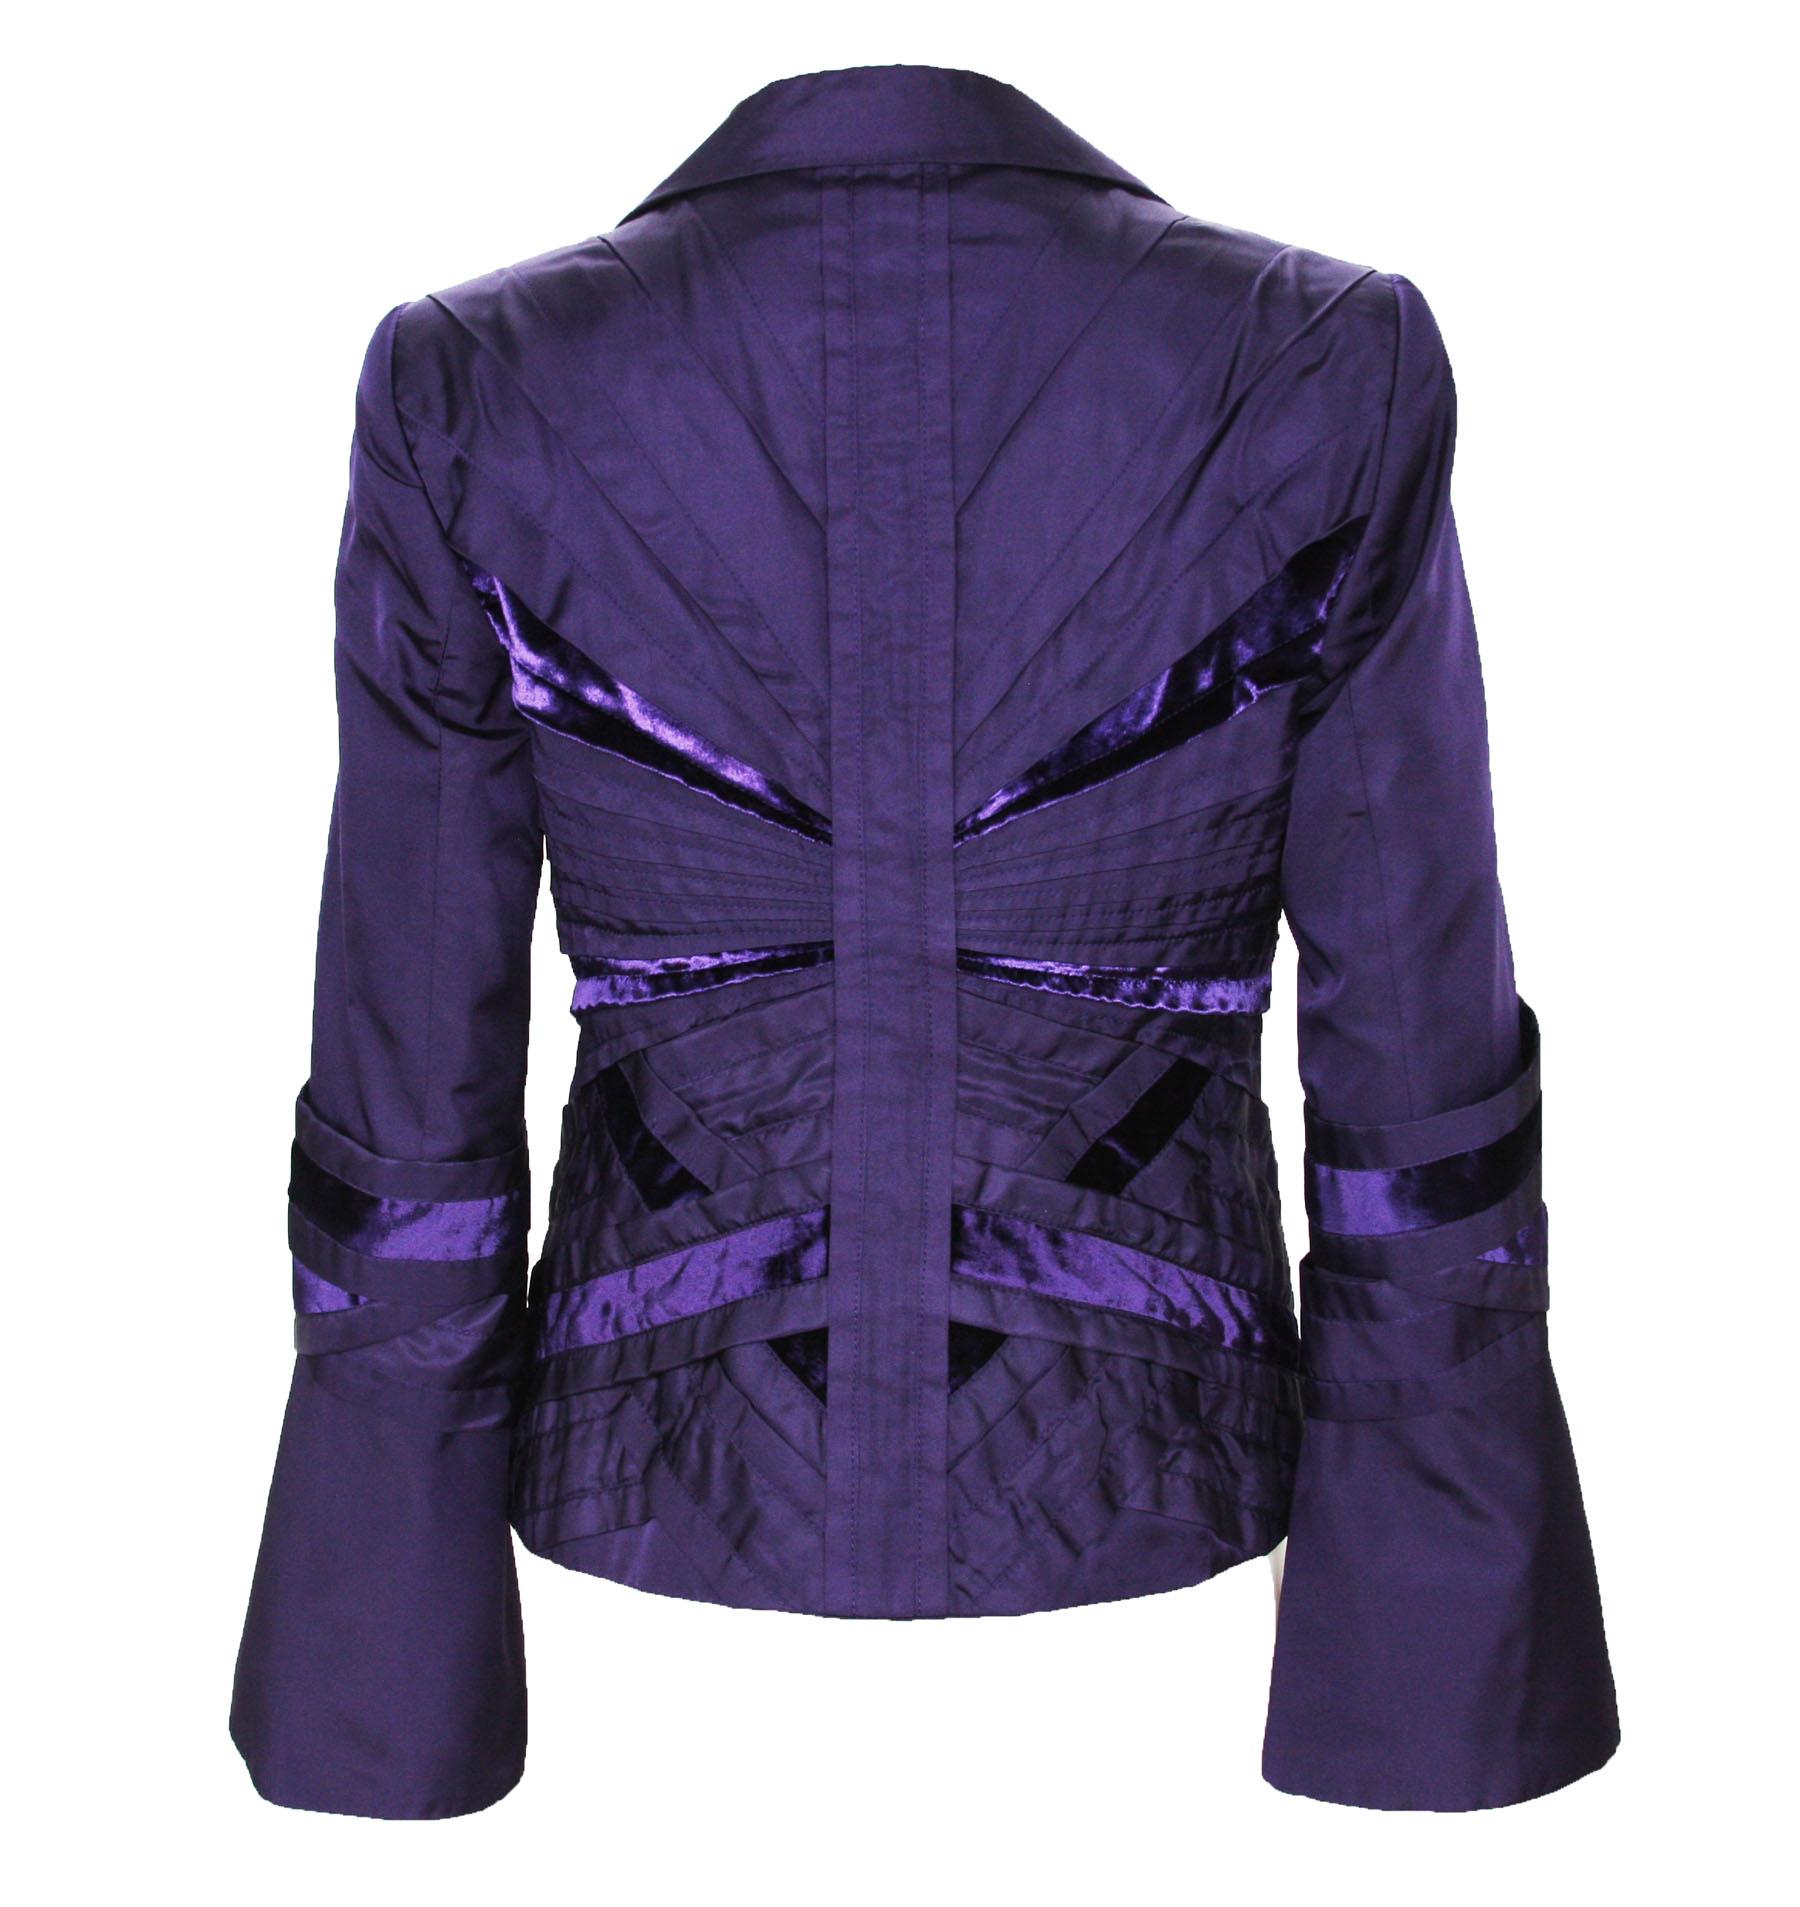 Women's Tom Ford for Gucci F/W 2004 Runway Collection Purple Silk Taffeta Jacket 42 - 6 For Sale